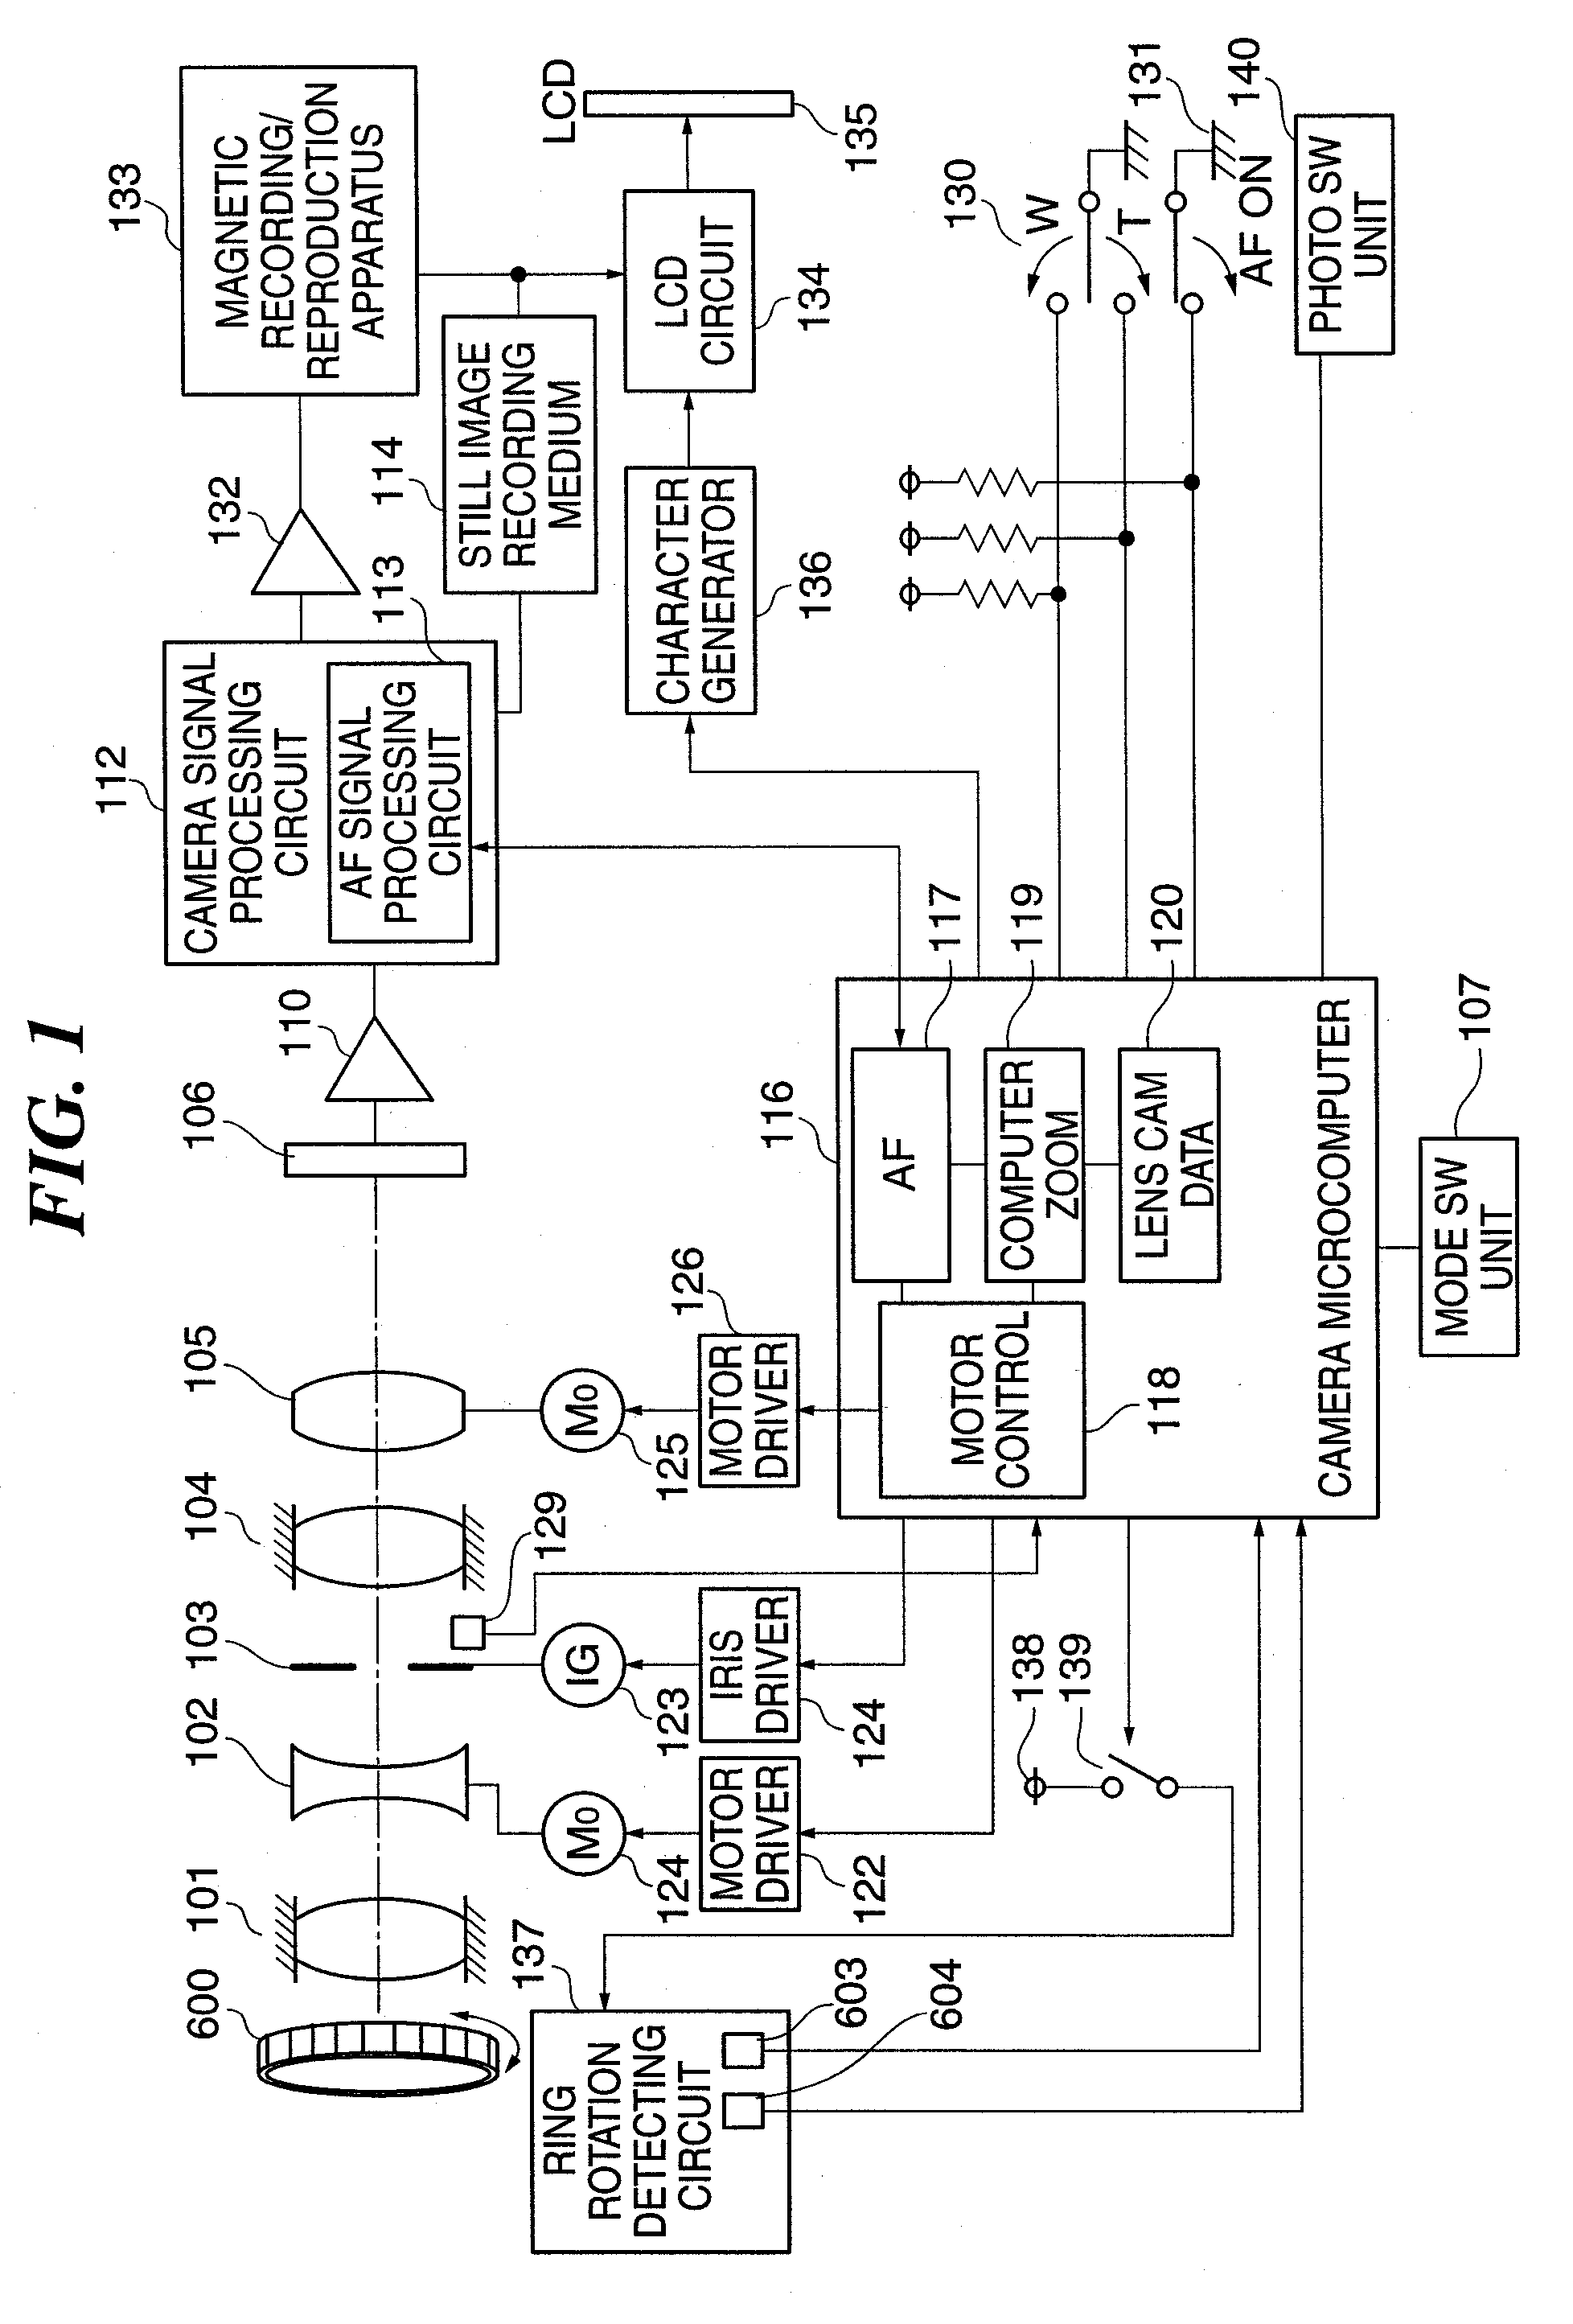 Image pickup apparatus, control method for the same, and program for implementing the control method